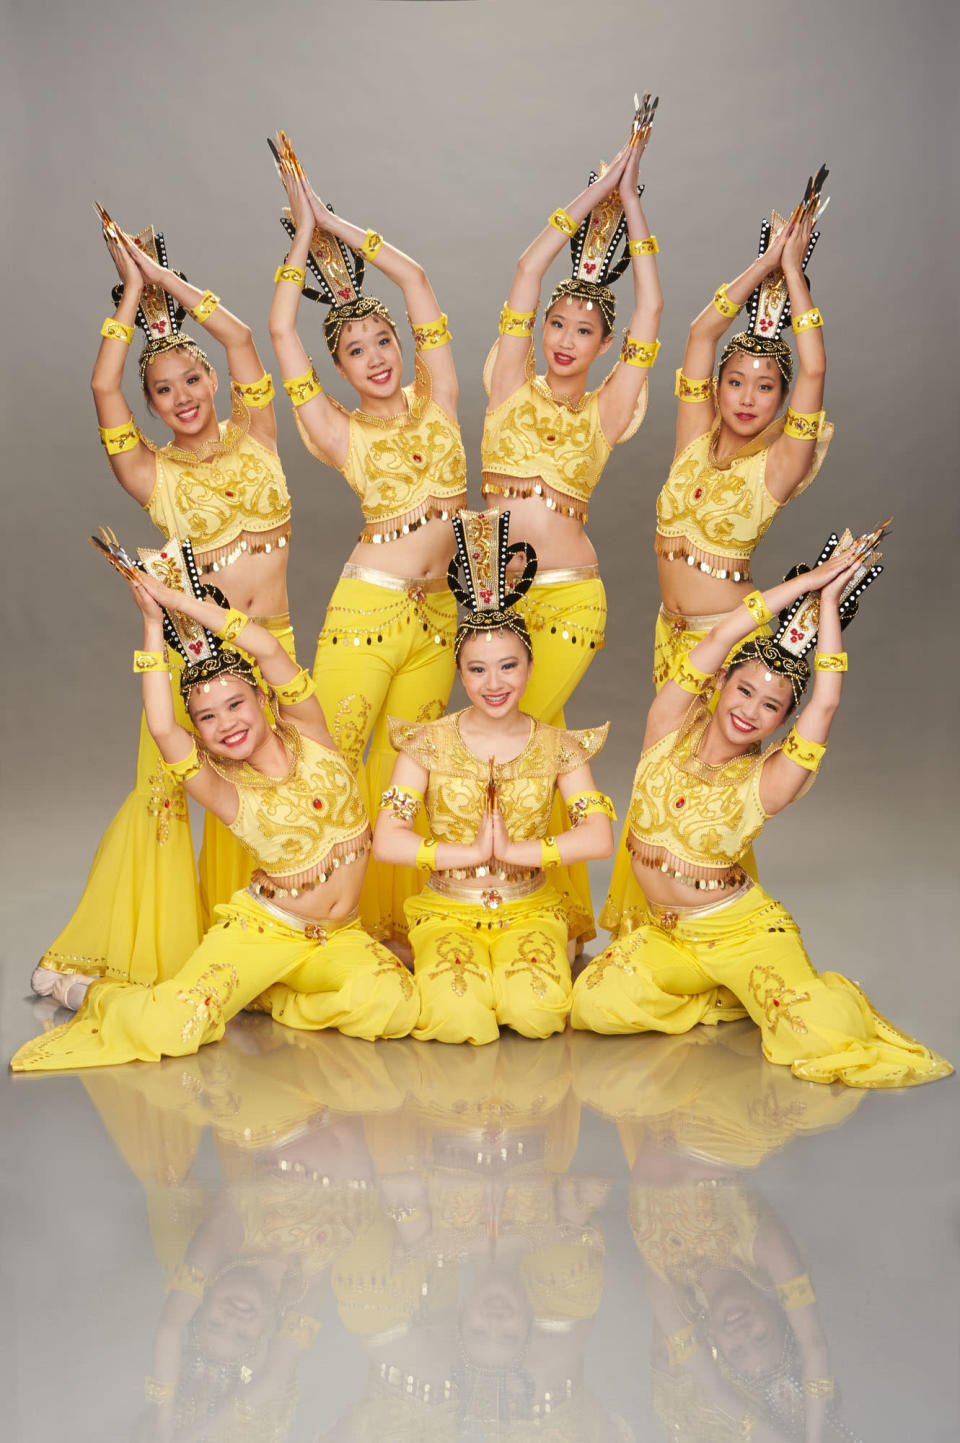 MitsMitsi Dancing School is one of the Top 60 acts on NBC's "America's Got Talent" Season 8.